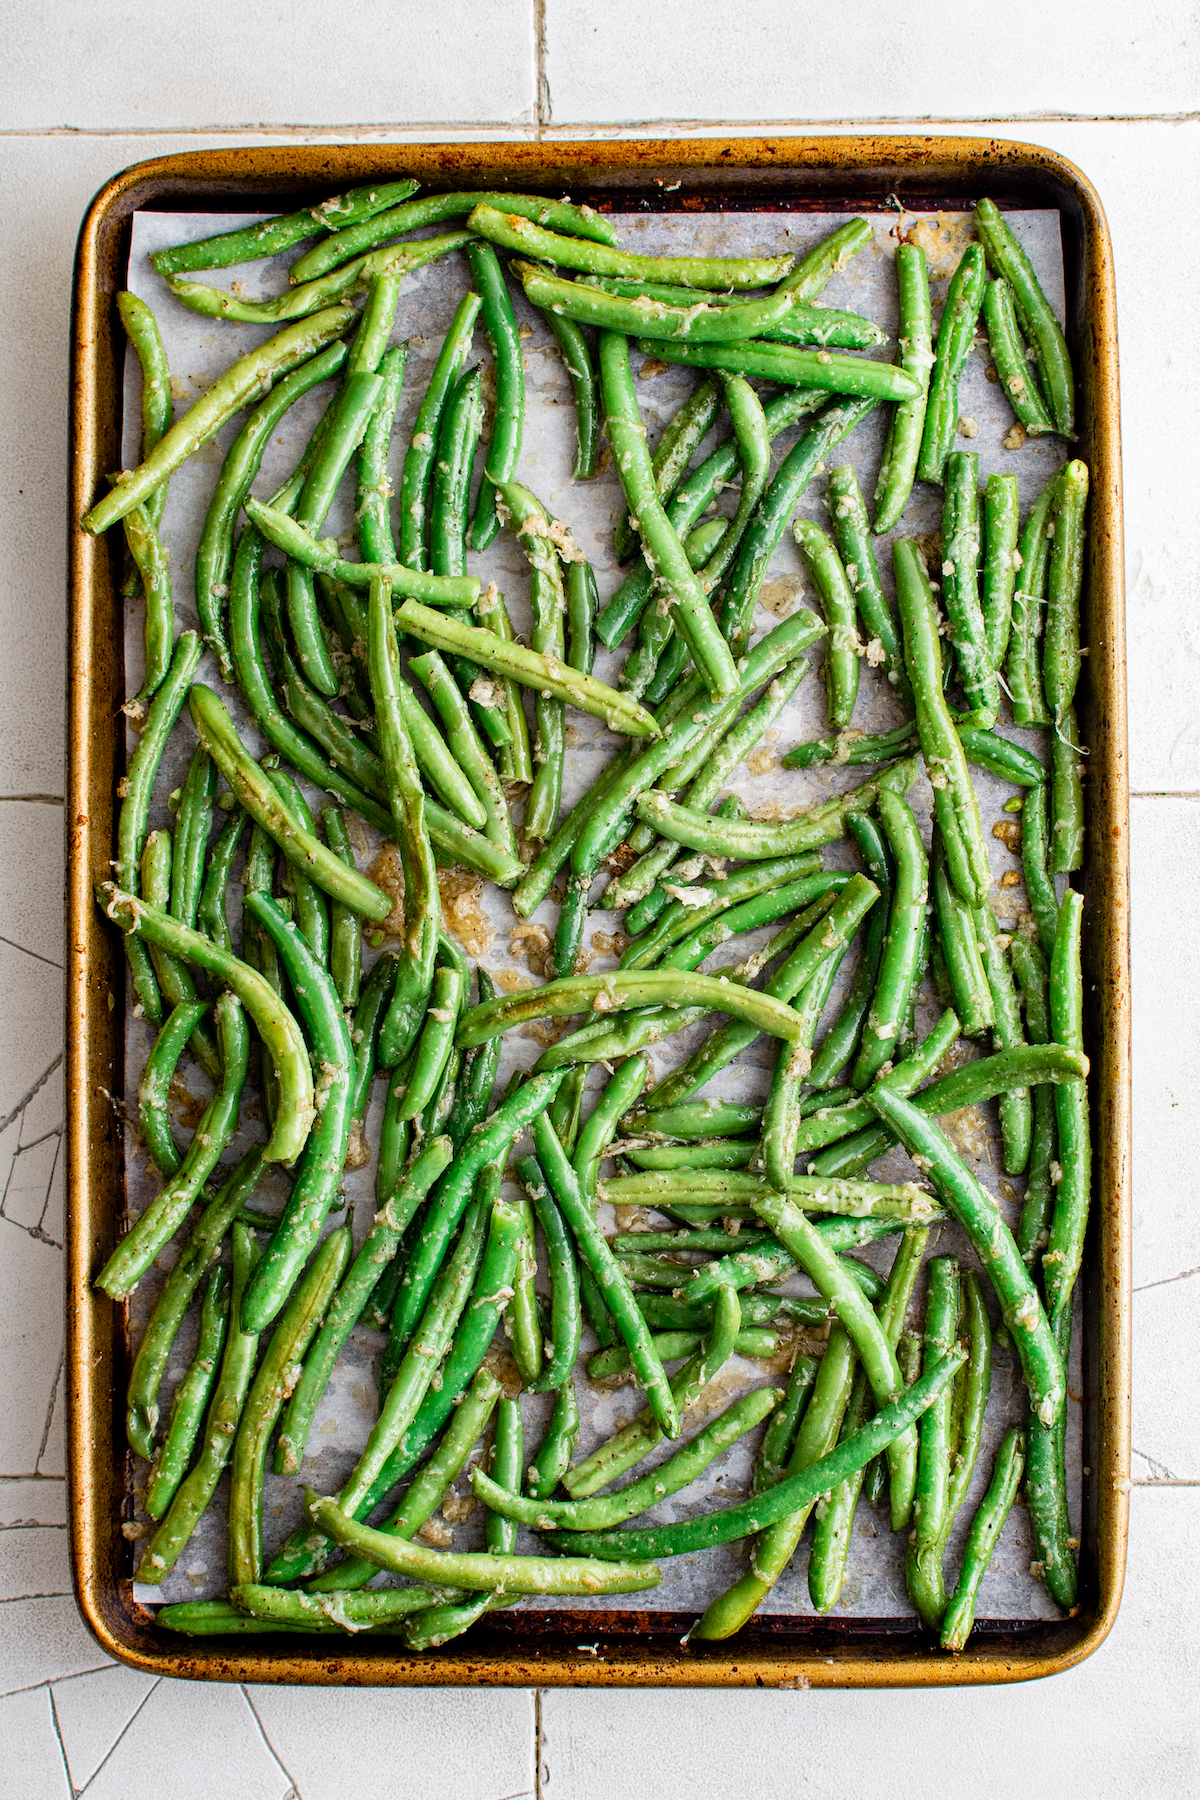 A sheet pan with oiled, seasoned green beans on it.